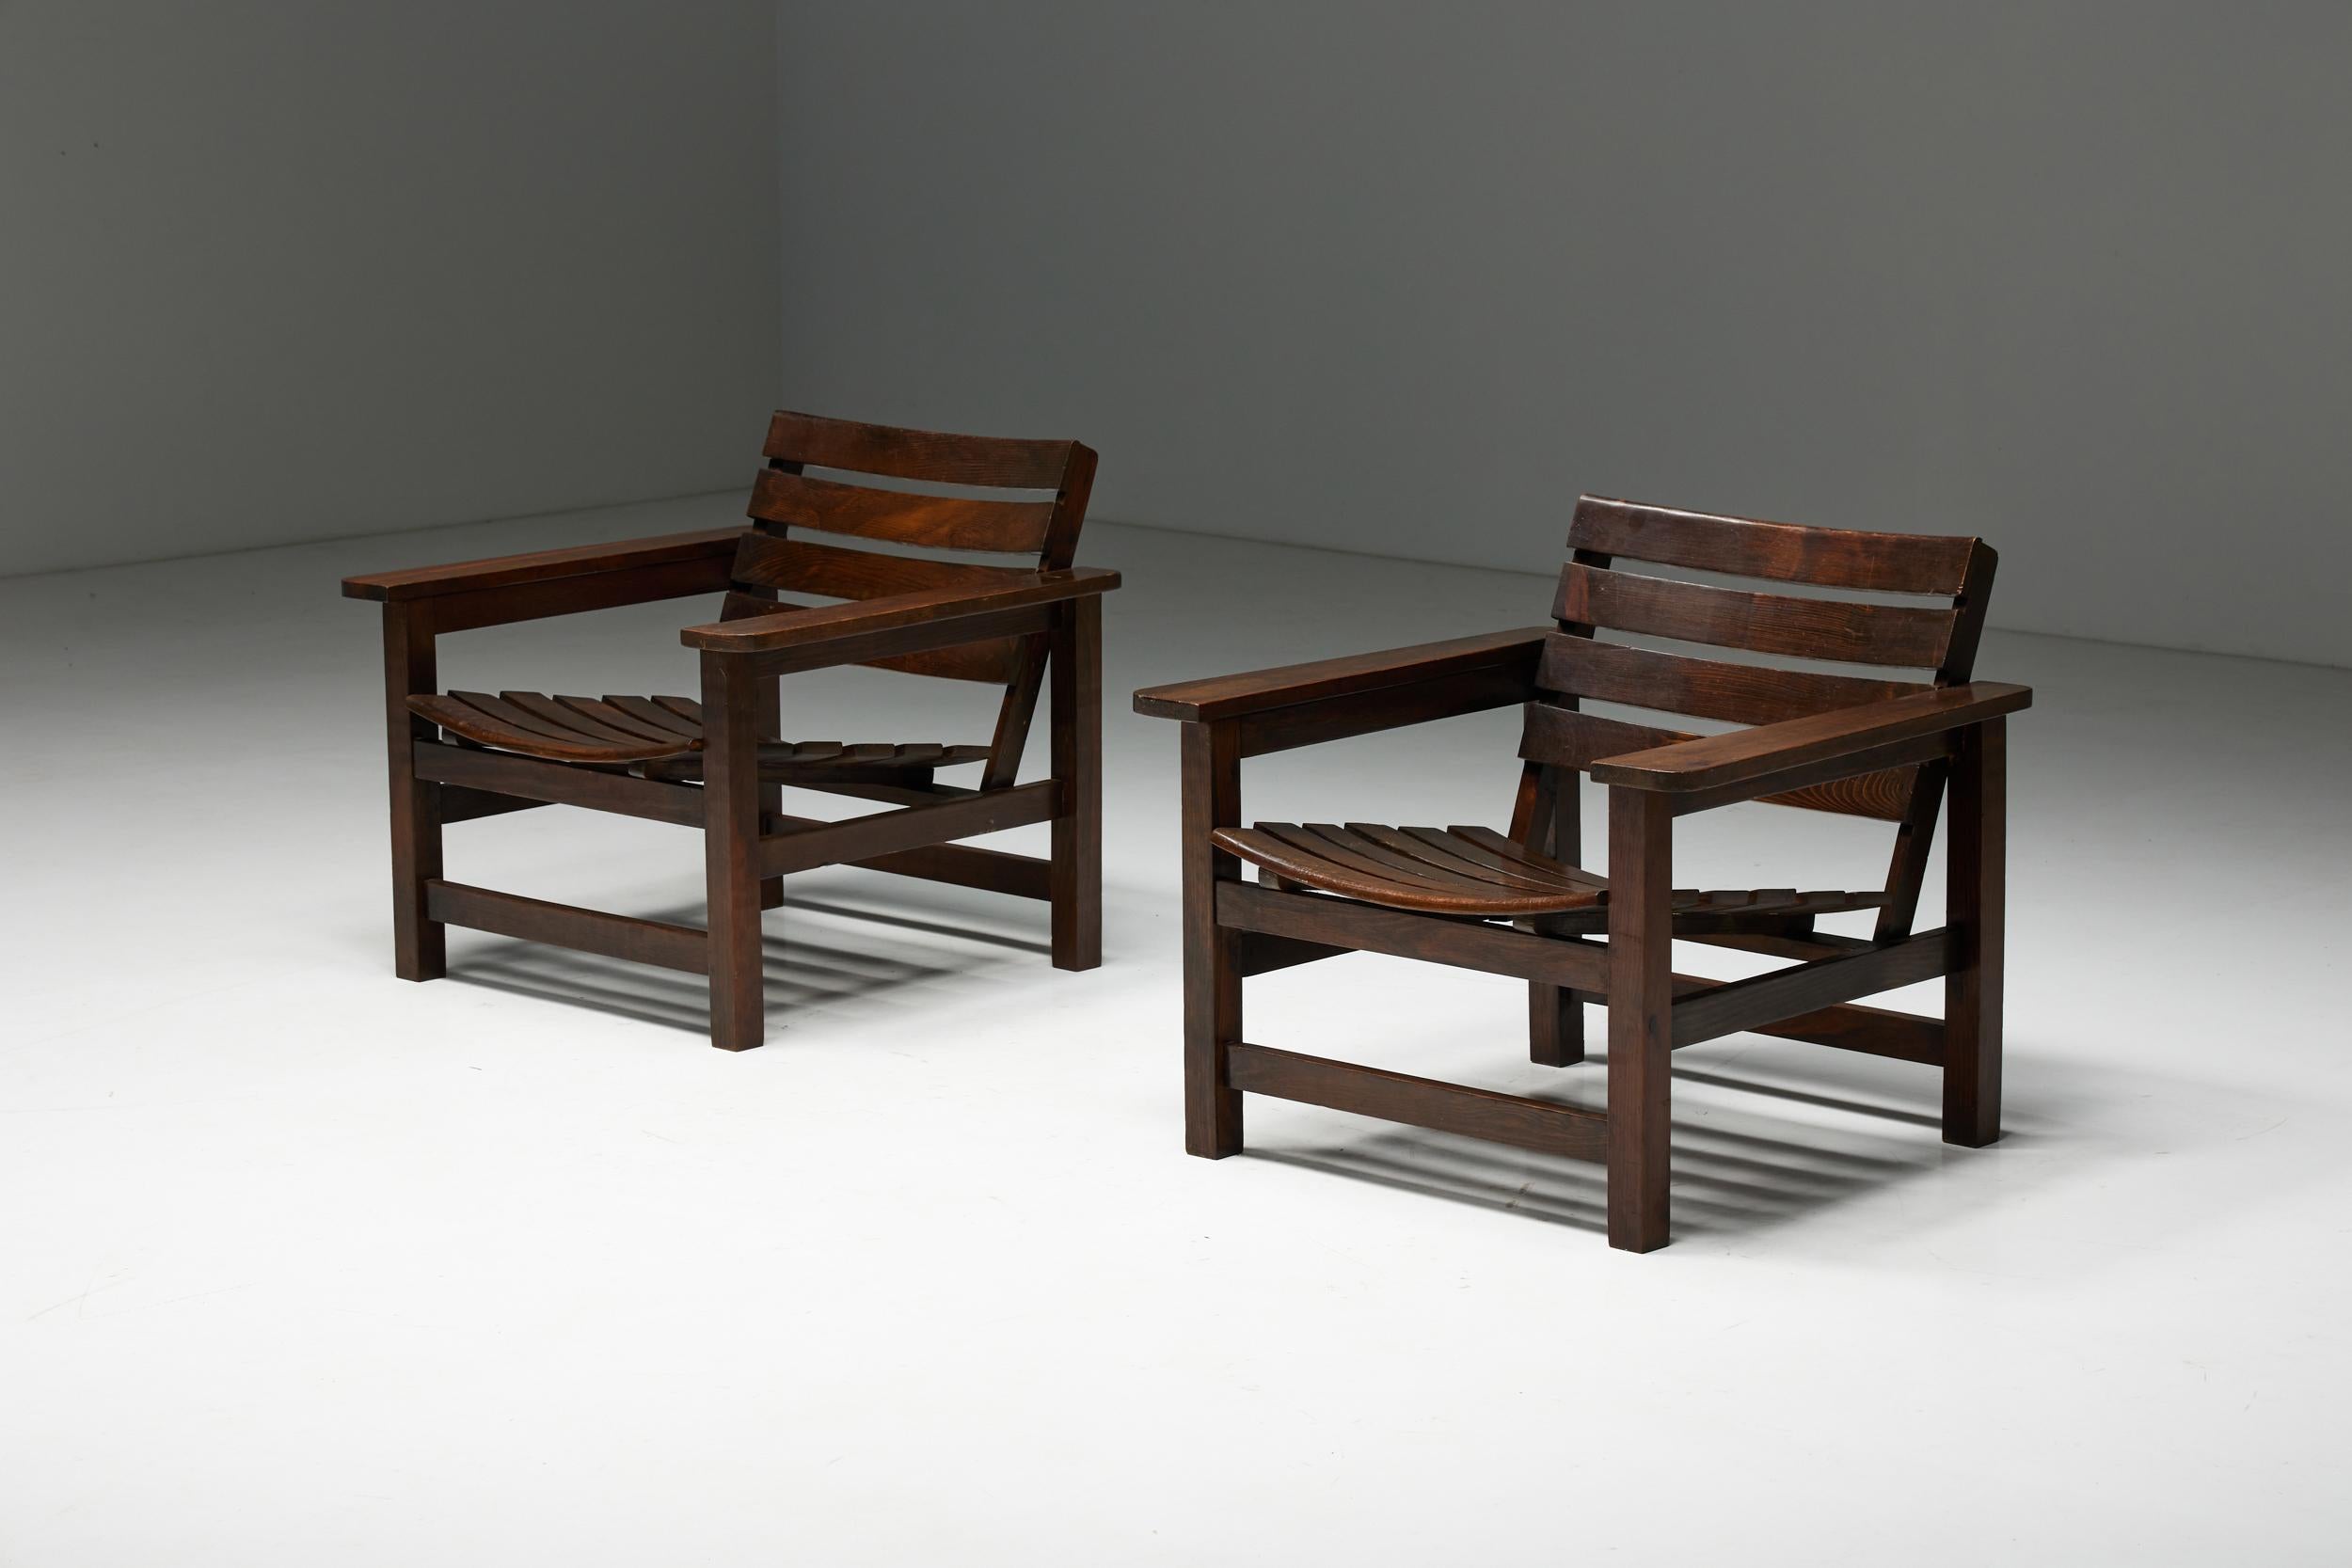 Rustic Brutalist Lounge Chairs, France, 1970s For Sale